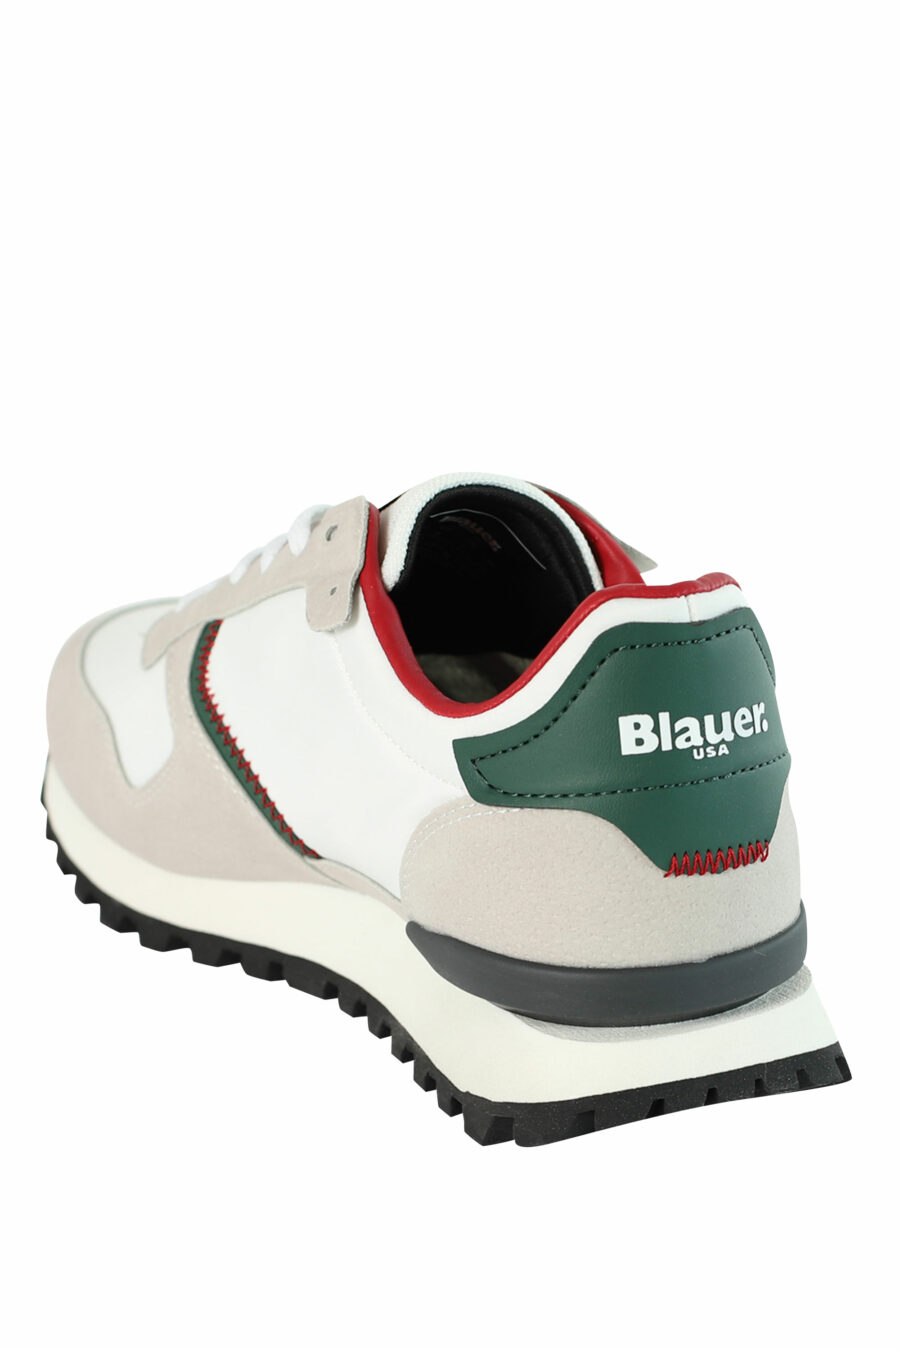 Trainers "DIXON" white mix with red and green details - 8058156493902 4